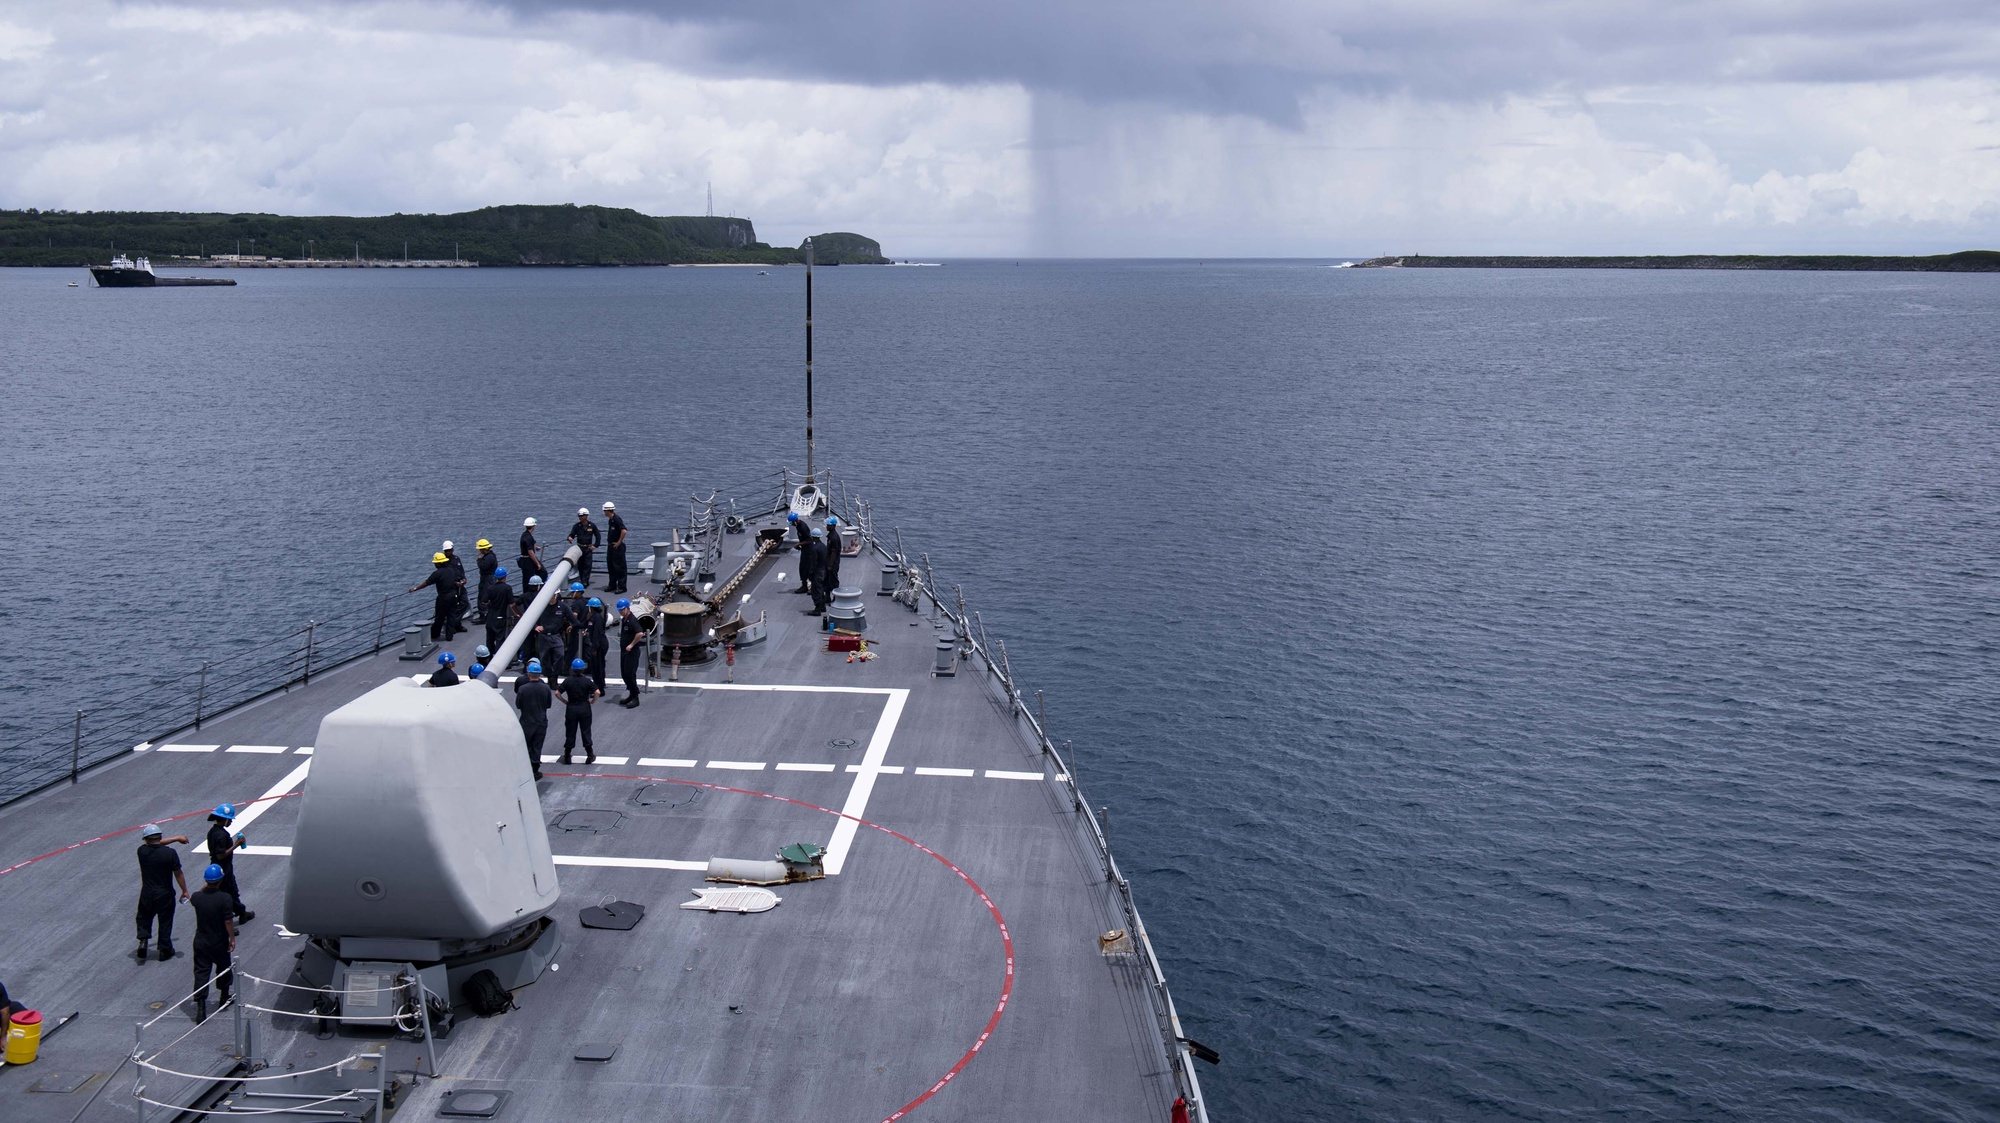 epa06802627 A handout photo made available by the US Navy on 12 June 2018 shows the Arleigh Burke-class guided-missile destroyer USS Benfold (DDG 65) departing from Apra Harbor, Guam, 11 June 2018, for the at-sea portion of Exercise Malabar 2018. Malabar 2018 is designed to advance military-to-military coordination in a multinational environment between the US, Japan and Indian maritime forces.  EPA/US NAVY/MC2 ANNA VAN NUYS HANDOUT  HANDOUT EDITORIAL USE ONLY/NO SALES